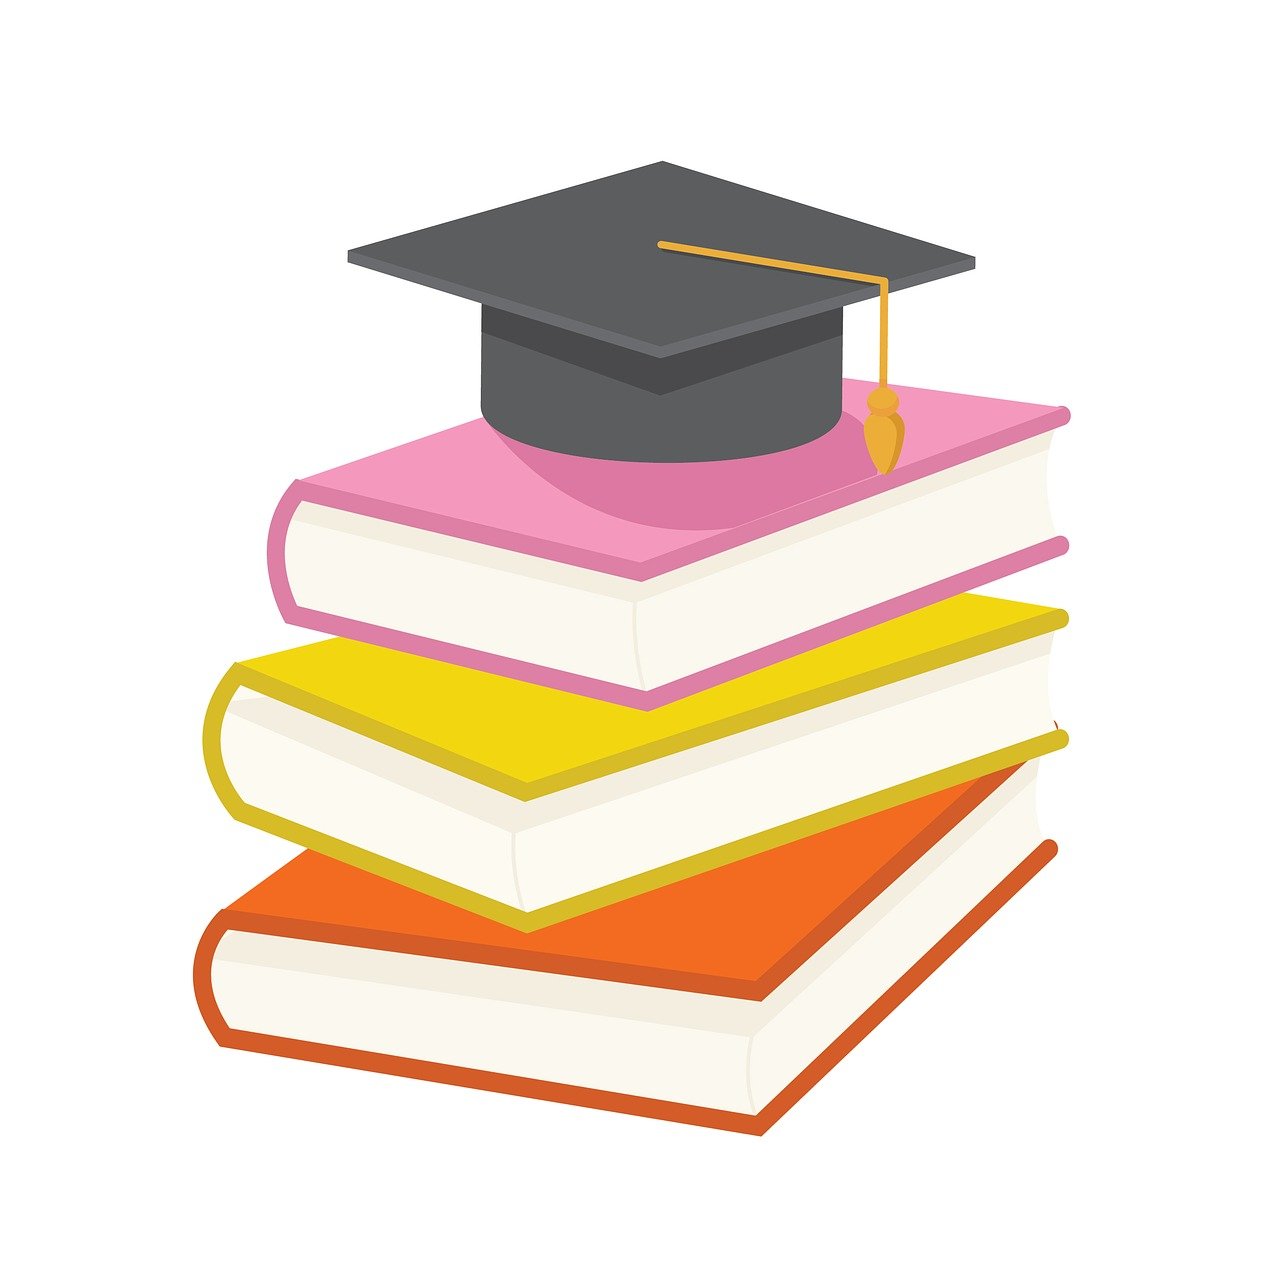 a stack of books with a graduation cap on top, an illustration of, academic art, editorial illustration colorful, matte illustration, full res, information